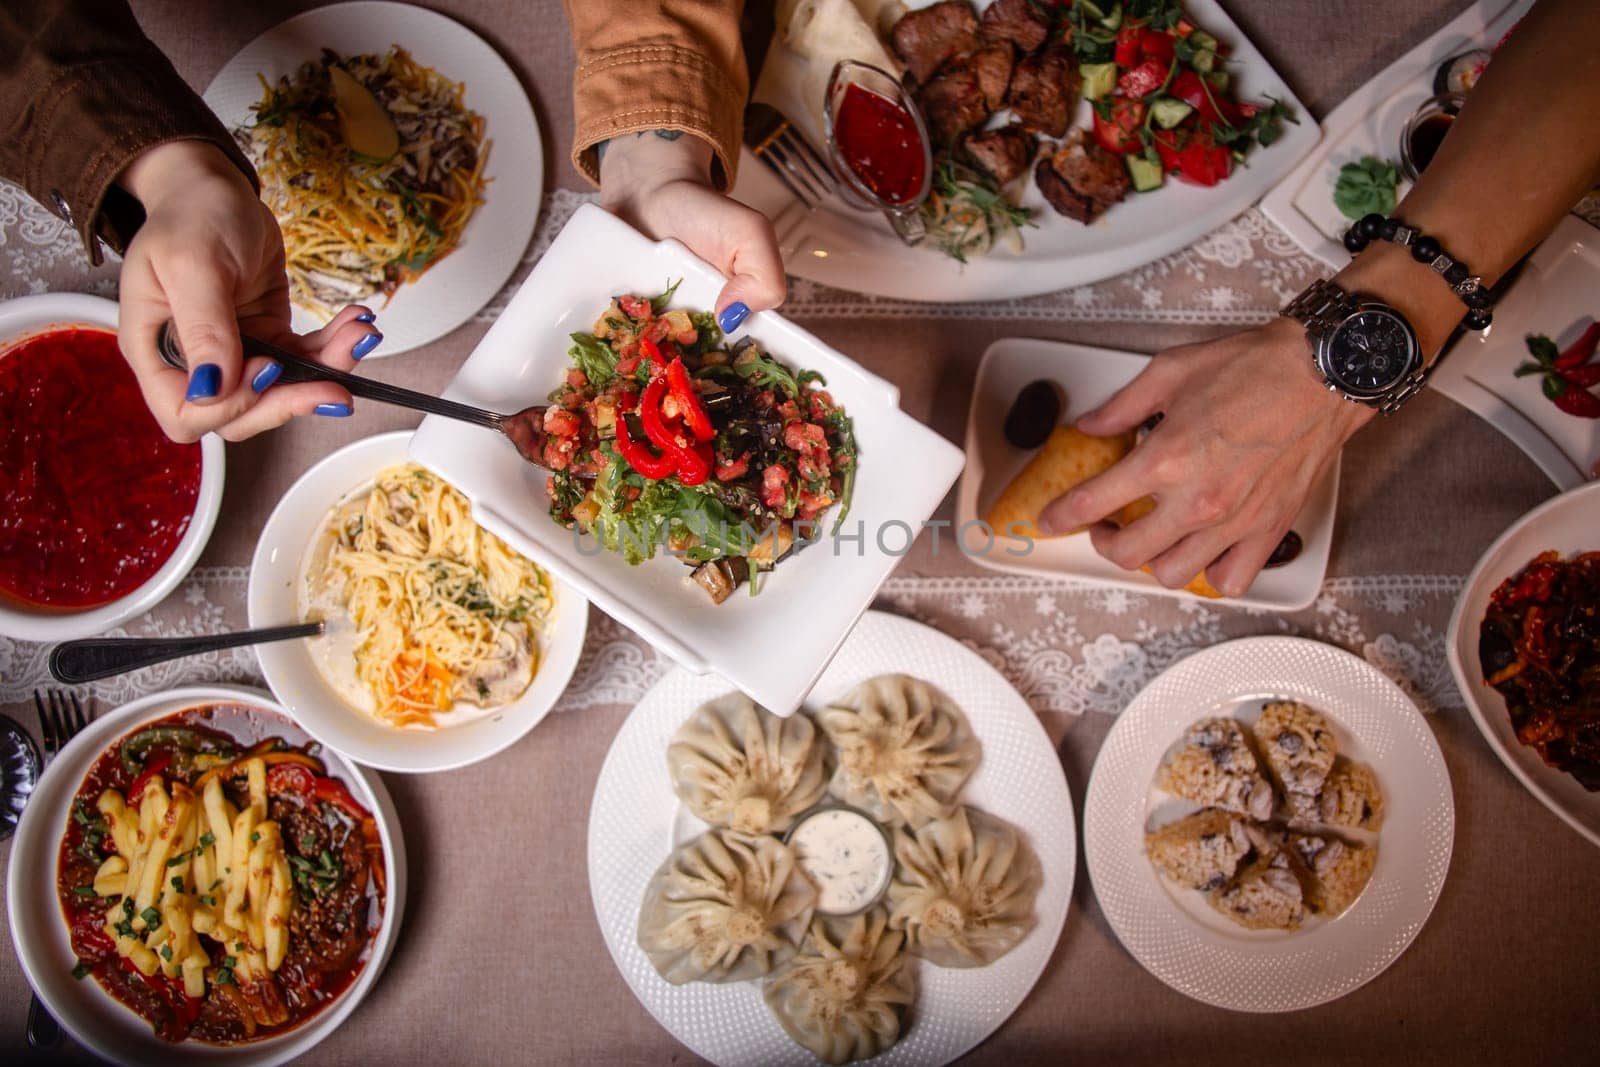 A table with delicious Uzbek dishes like soup, salad, dumplings, and meat skewers, offering a taste of Uzbekistans culinary heritage